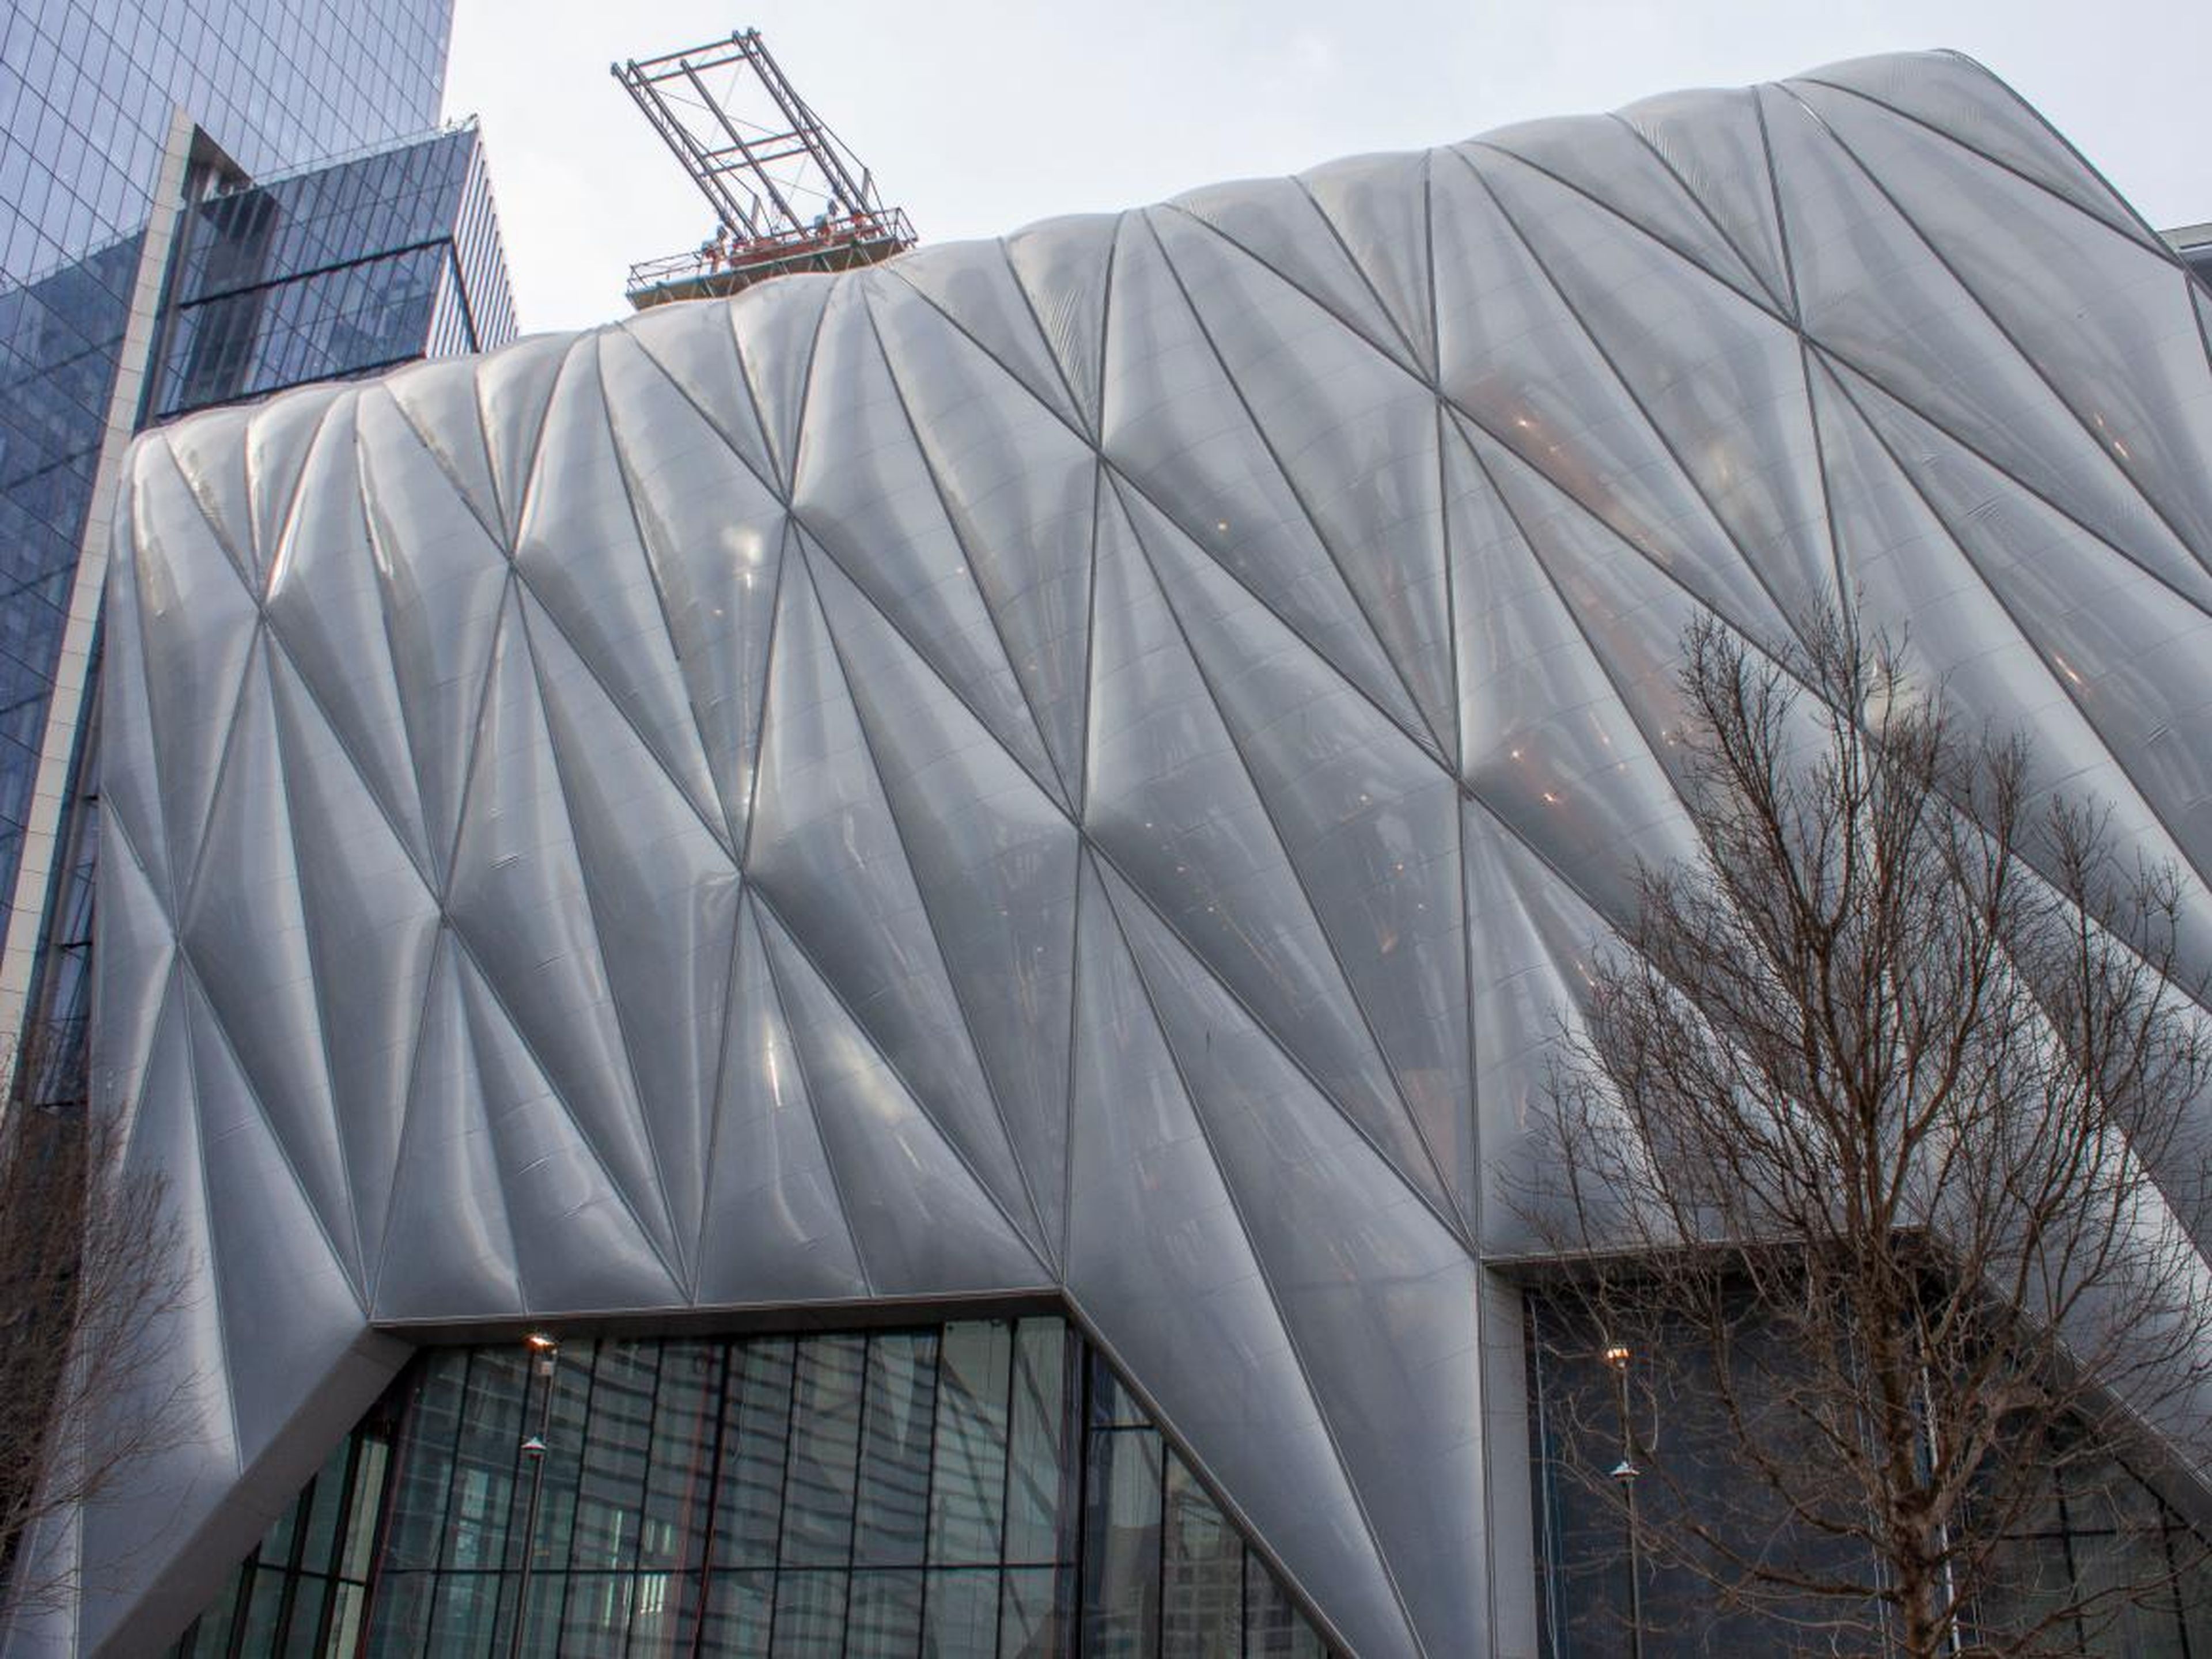 On the south side of the courtyard is the Shed, Hudson Yards' performing arts space that will feature artists in fields including hip hop and classical music, theater, dance, and more.